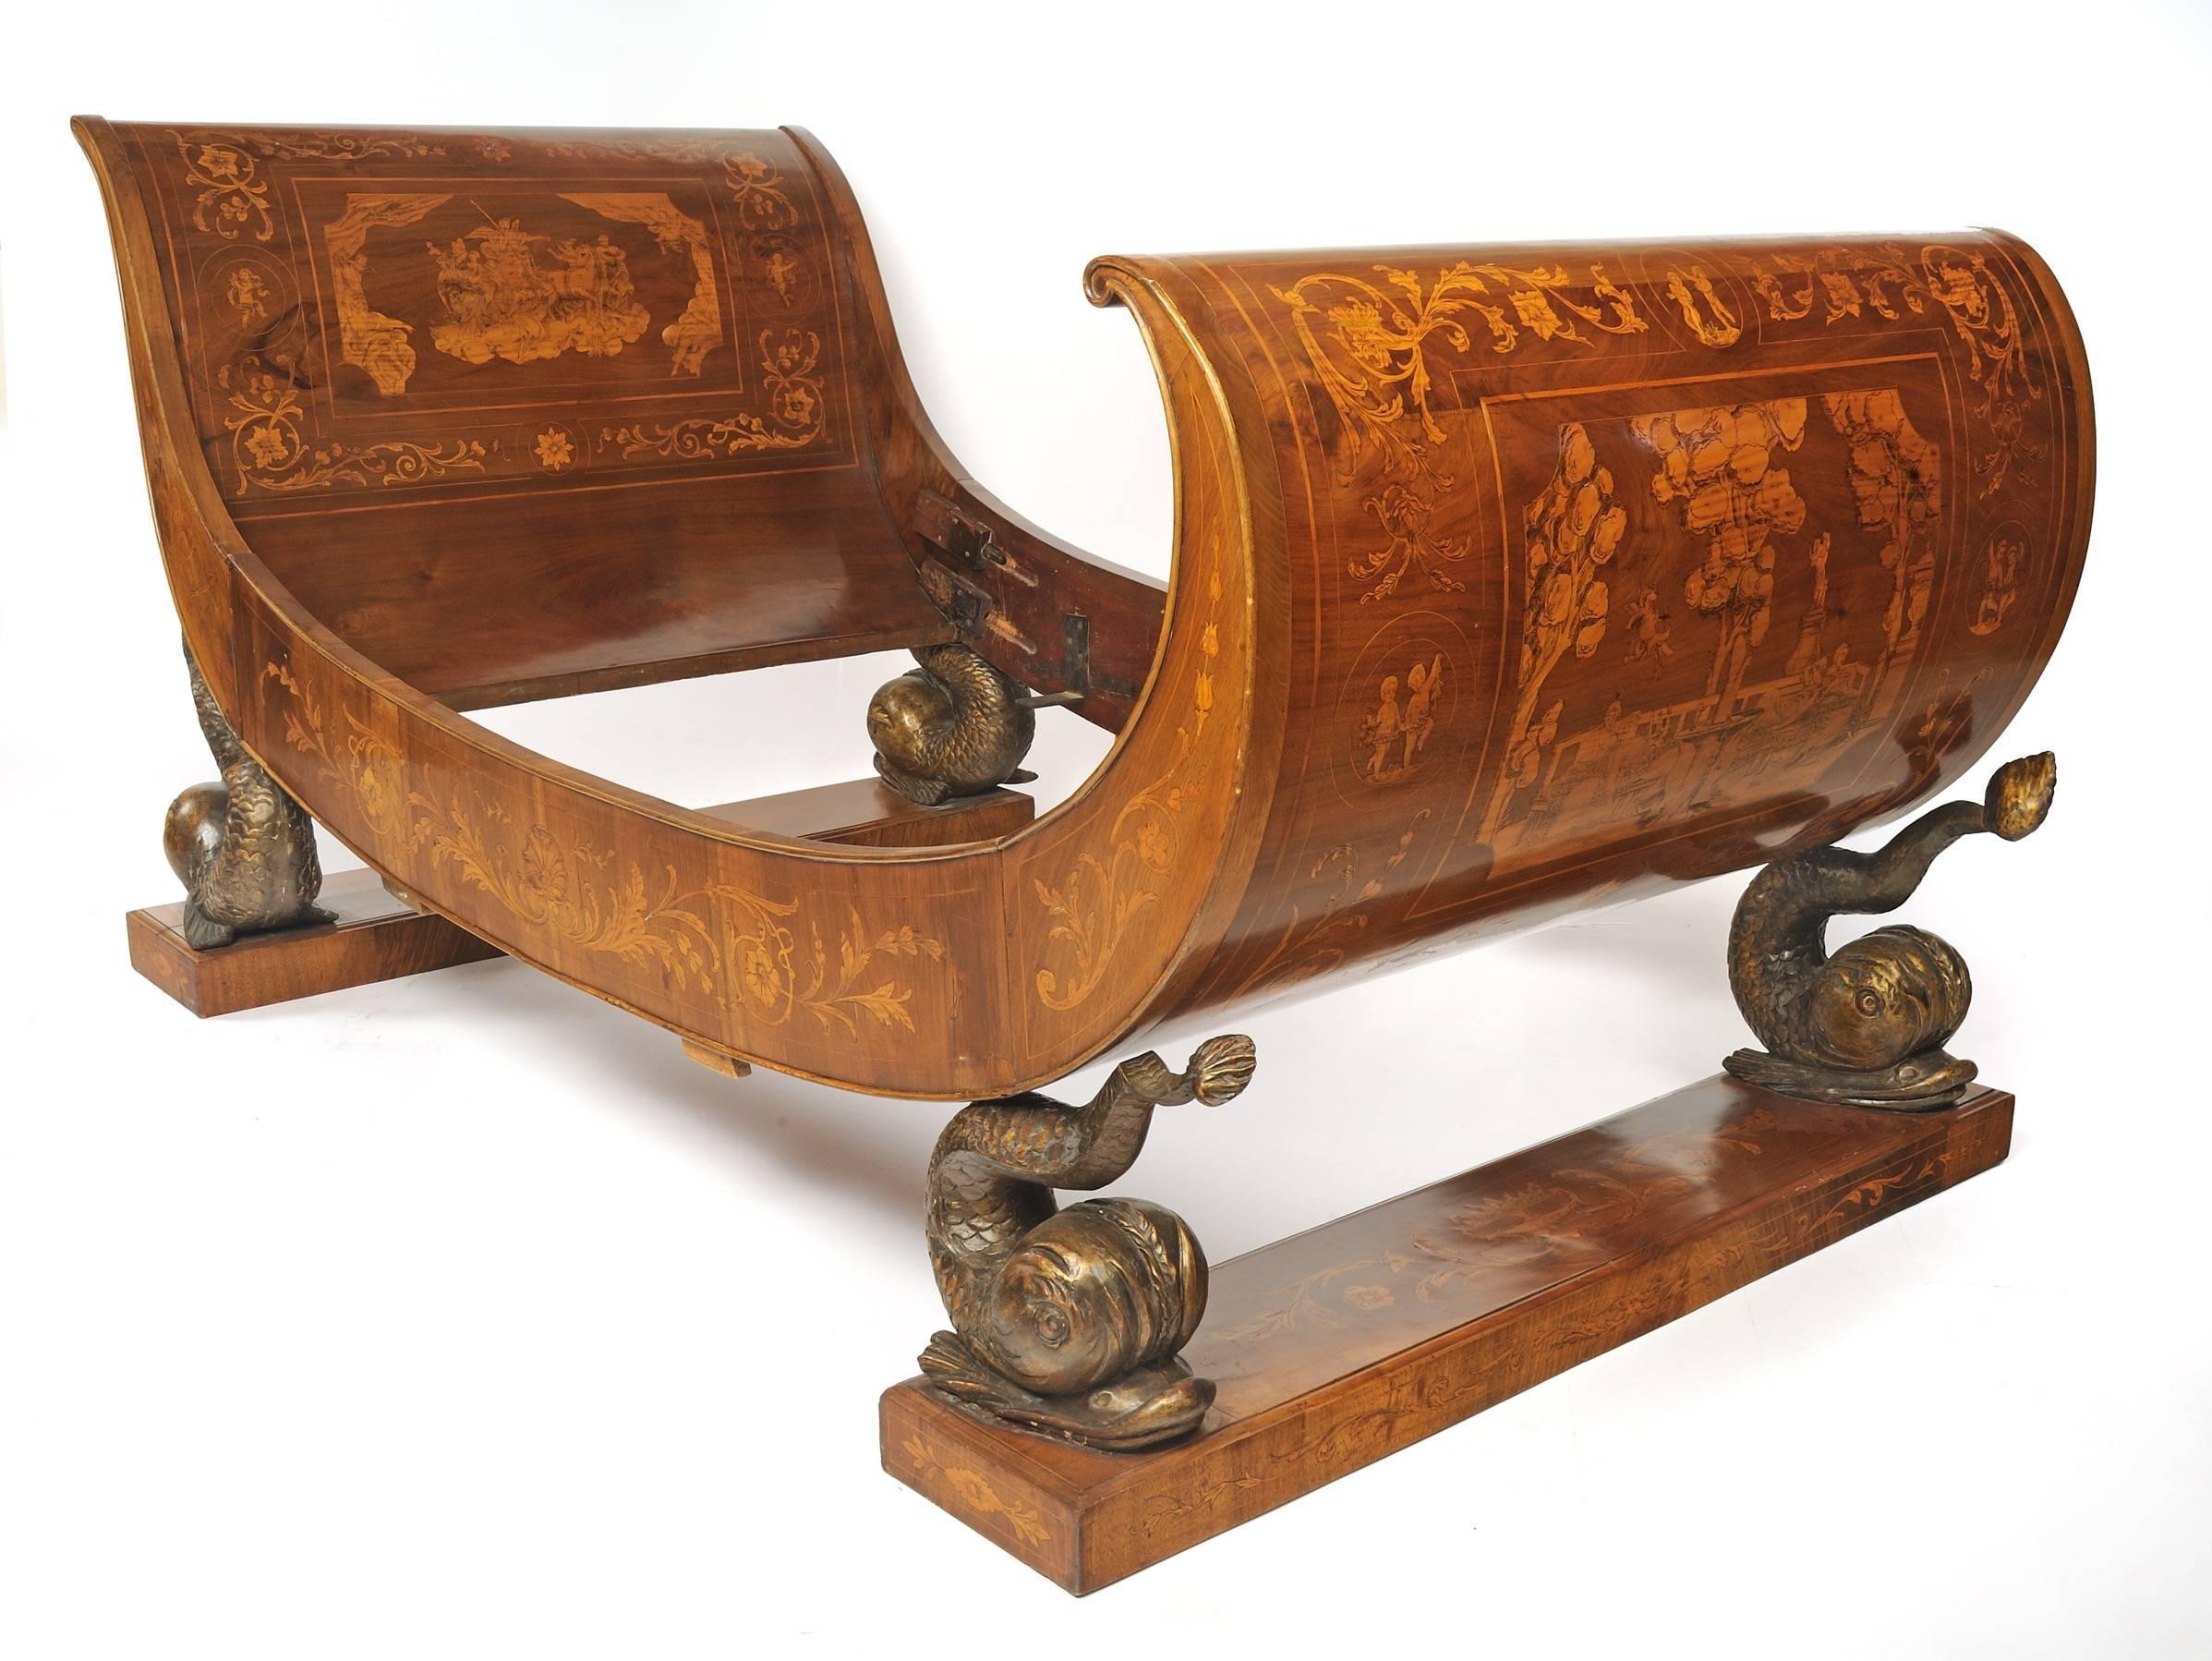 Early 19th century continental marquetry and mahogany sleigh bed.
Lucca, Tuscany.

An exquisite example of Italian marquetry work, this early 19th century mahogany sleigh bed rests upon four ornate and fantastical depictions of swimming dolphins,